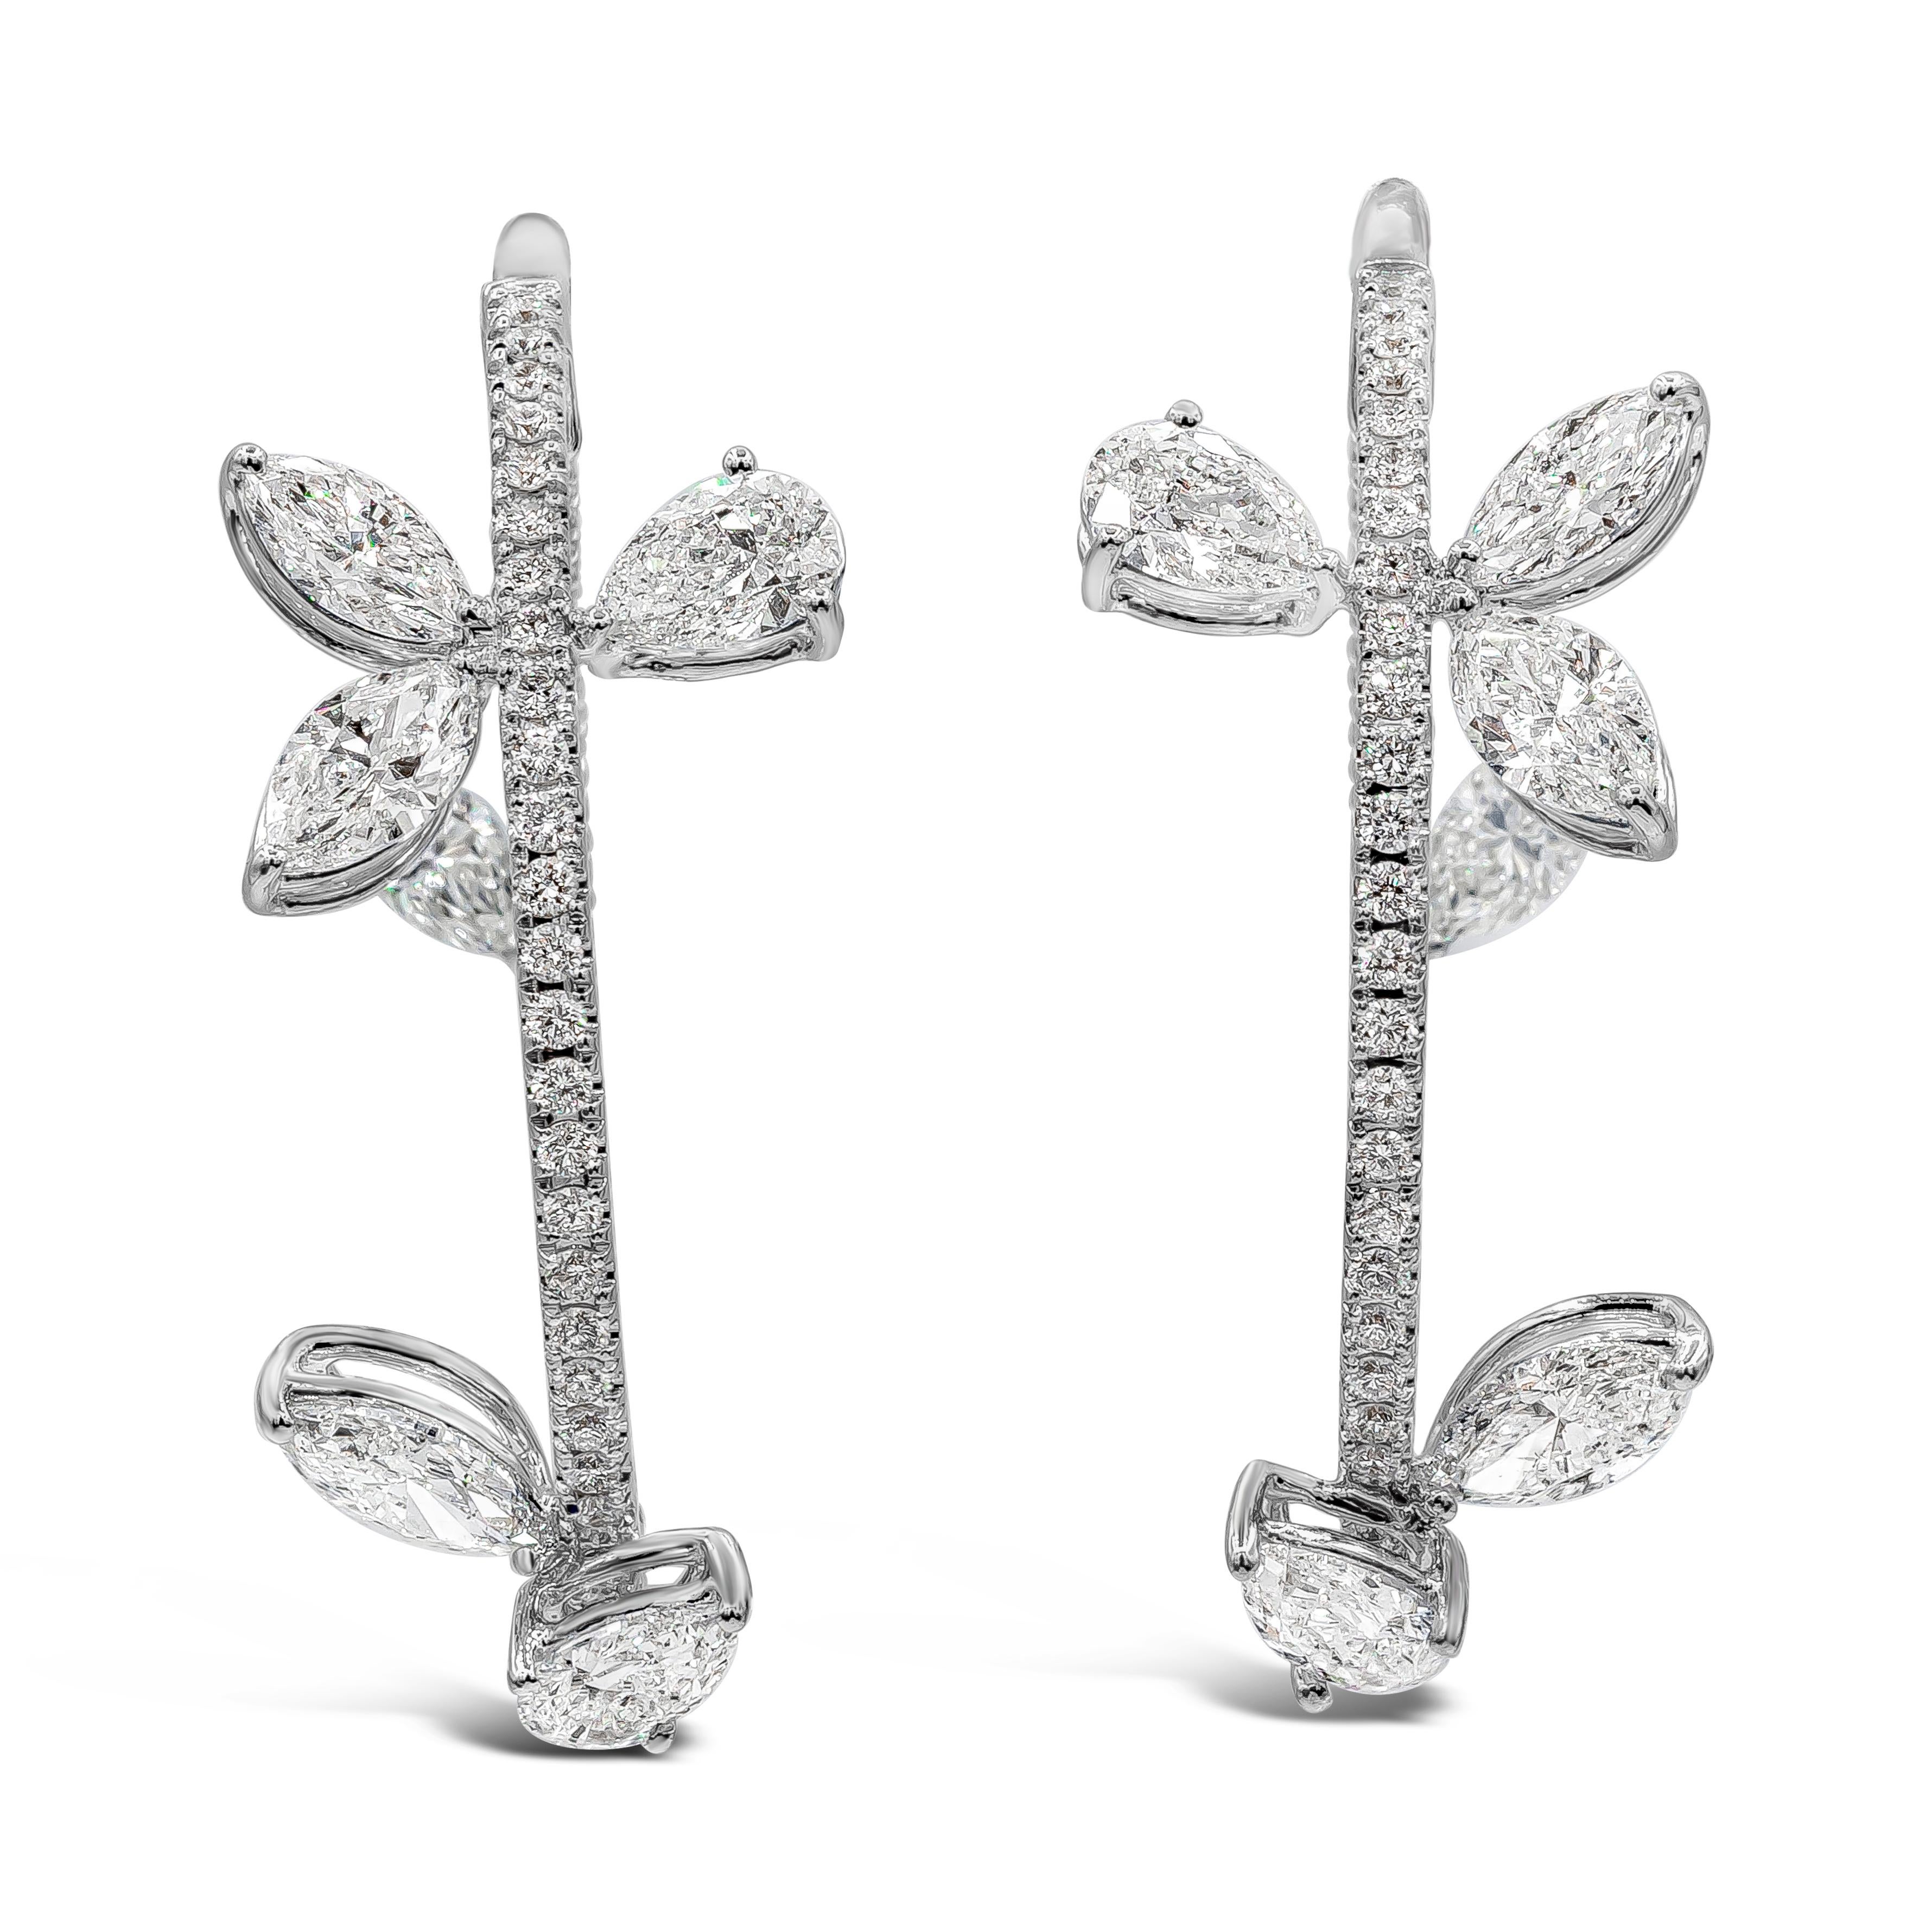 A unique and fashionable pair of hoop earrings showcasing a row of round brilliant diamonds, accented by pear and marquise cut diamonds. Diamonds weigh 4.47 carats total. Made in 18k white gold. 1.25 inch diameter.

Style available in different